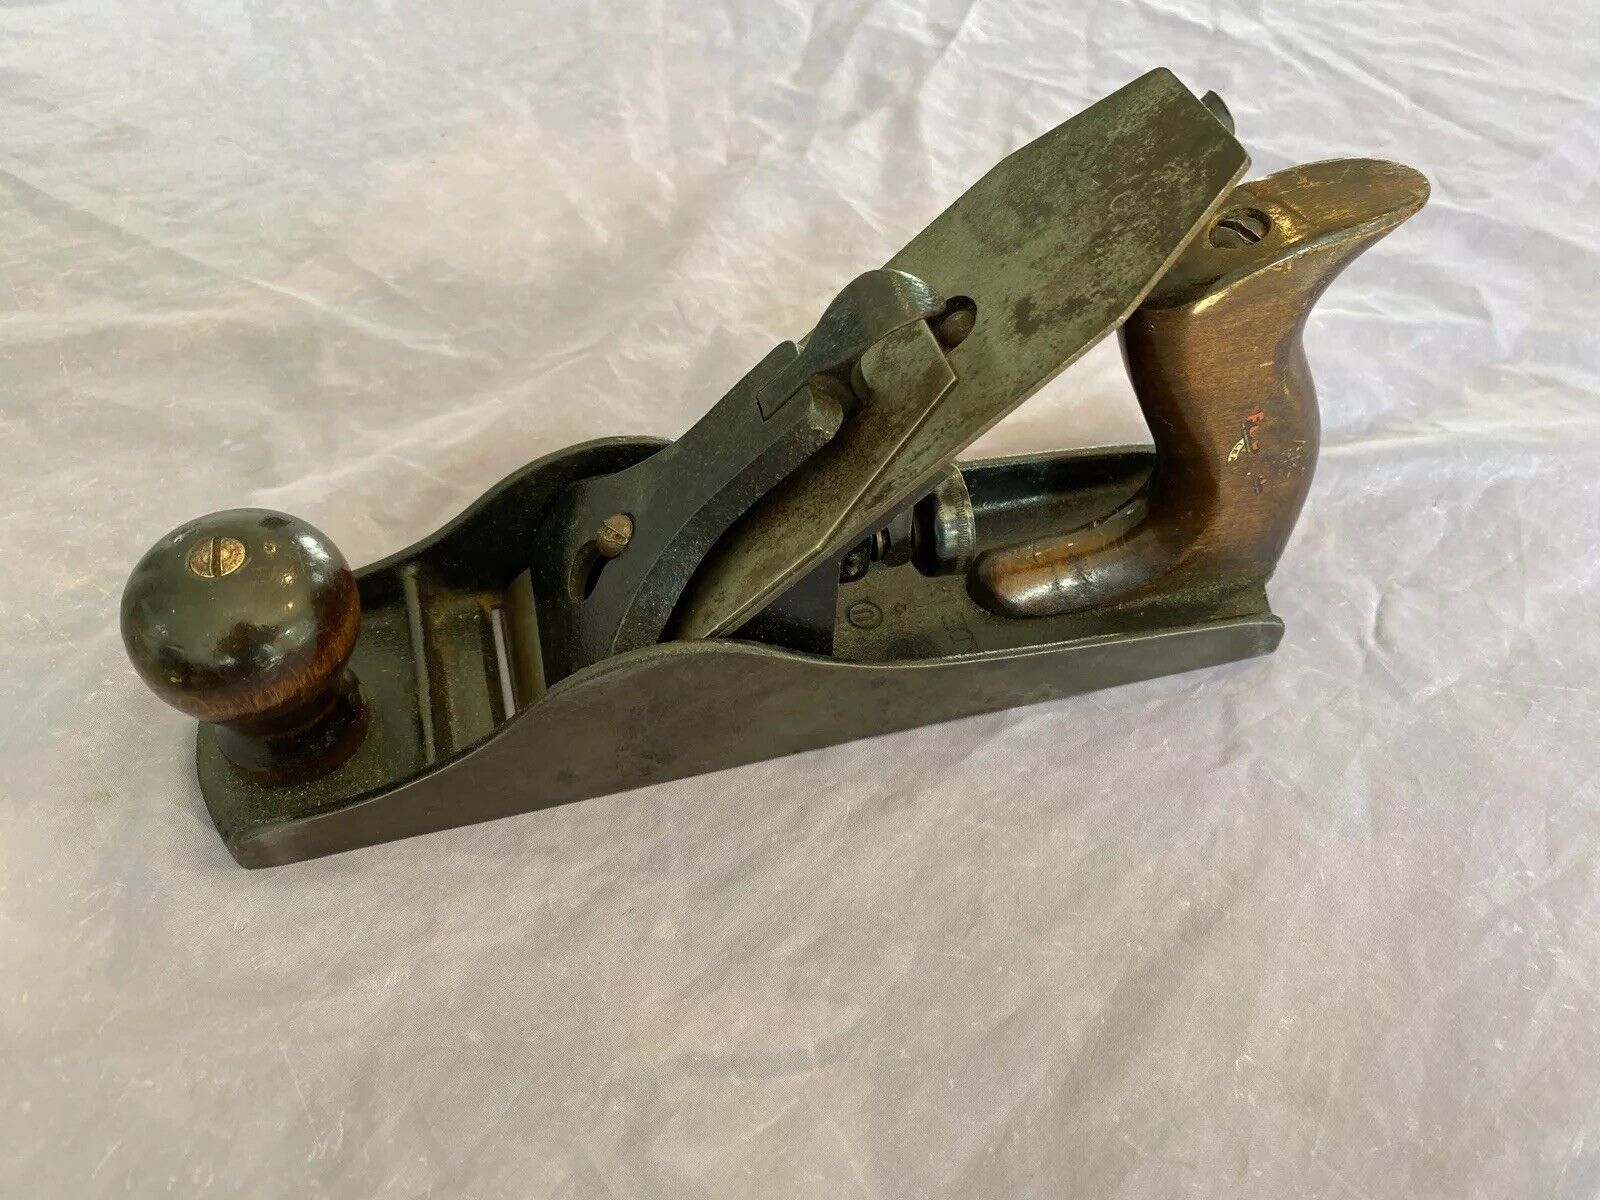 VINTAGE FULTON BENCH PLANE MARKED 3 - VERY GOOD COND